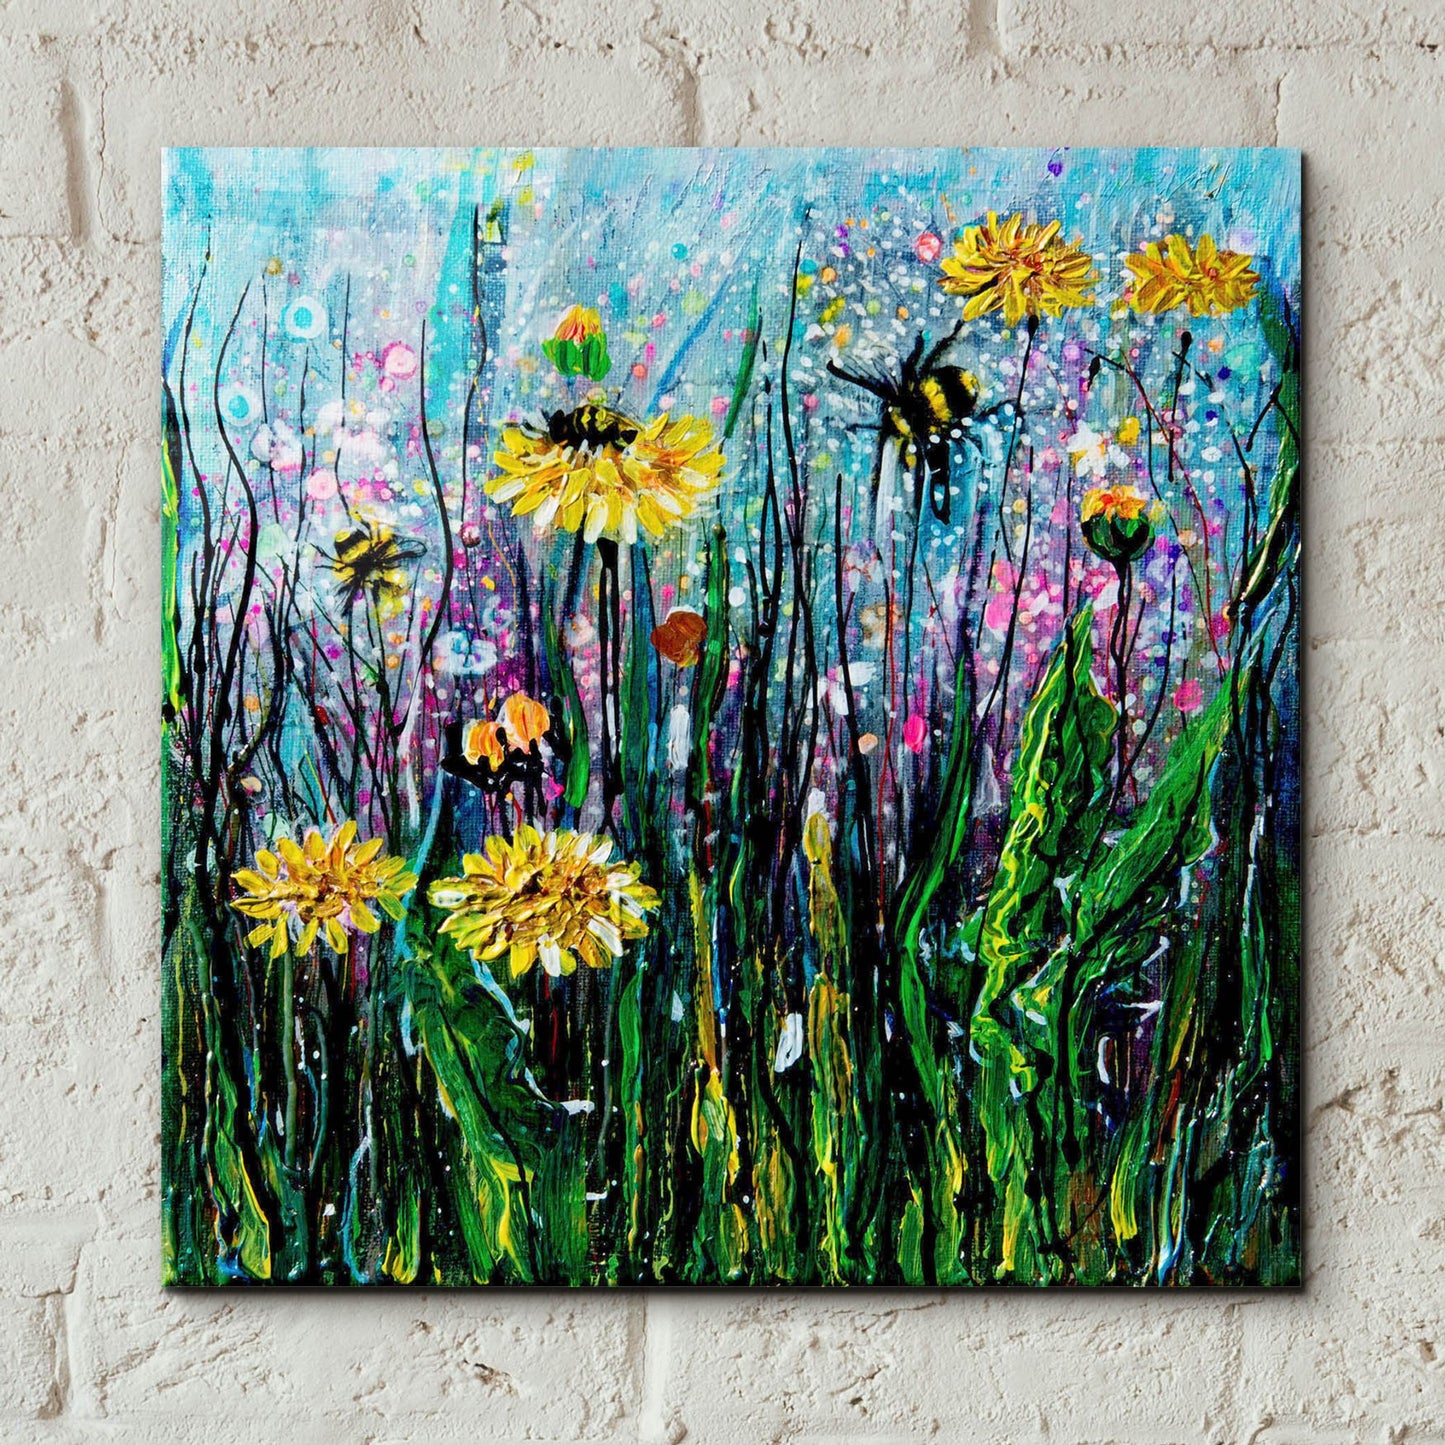 Epic Art 'Field of Flowers and a Bee' by Lena Owens, Acrylic Glass Wall Art,12x12